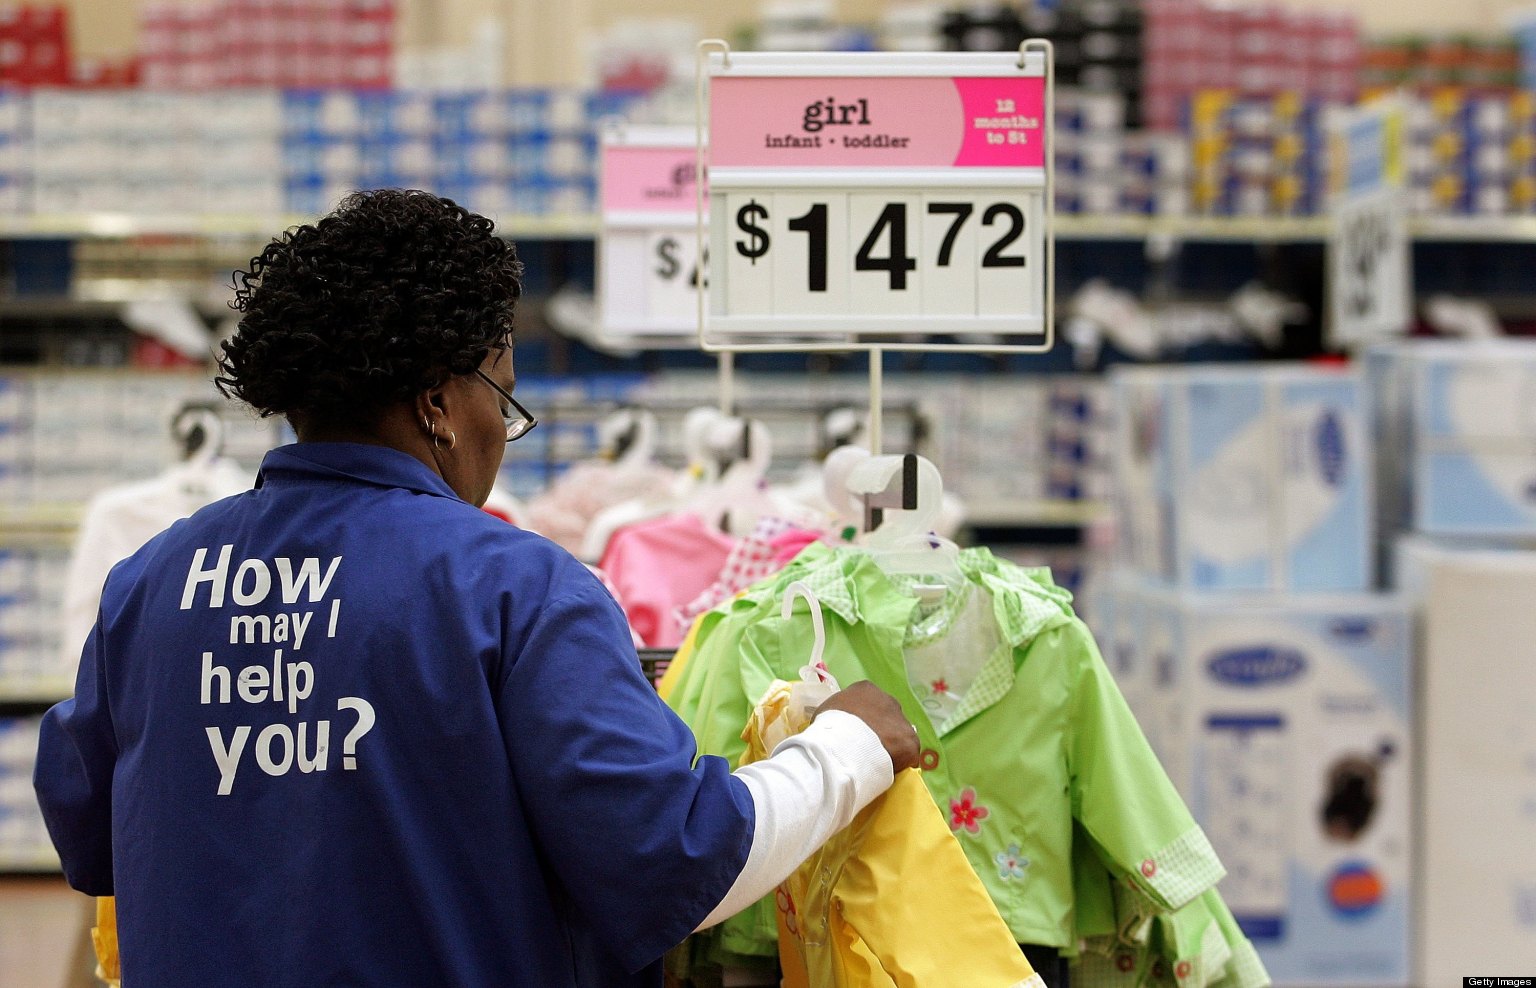 Retail Salesperson, The Most Common U.S. Worker, Earns Just $25,310 Per Year On Average: BLS